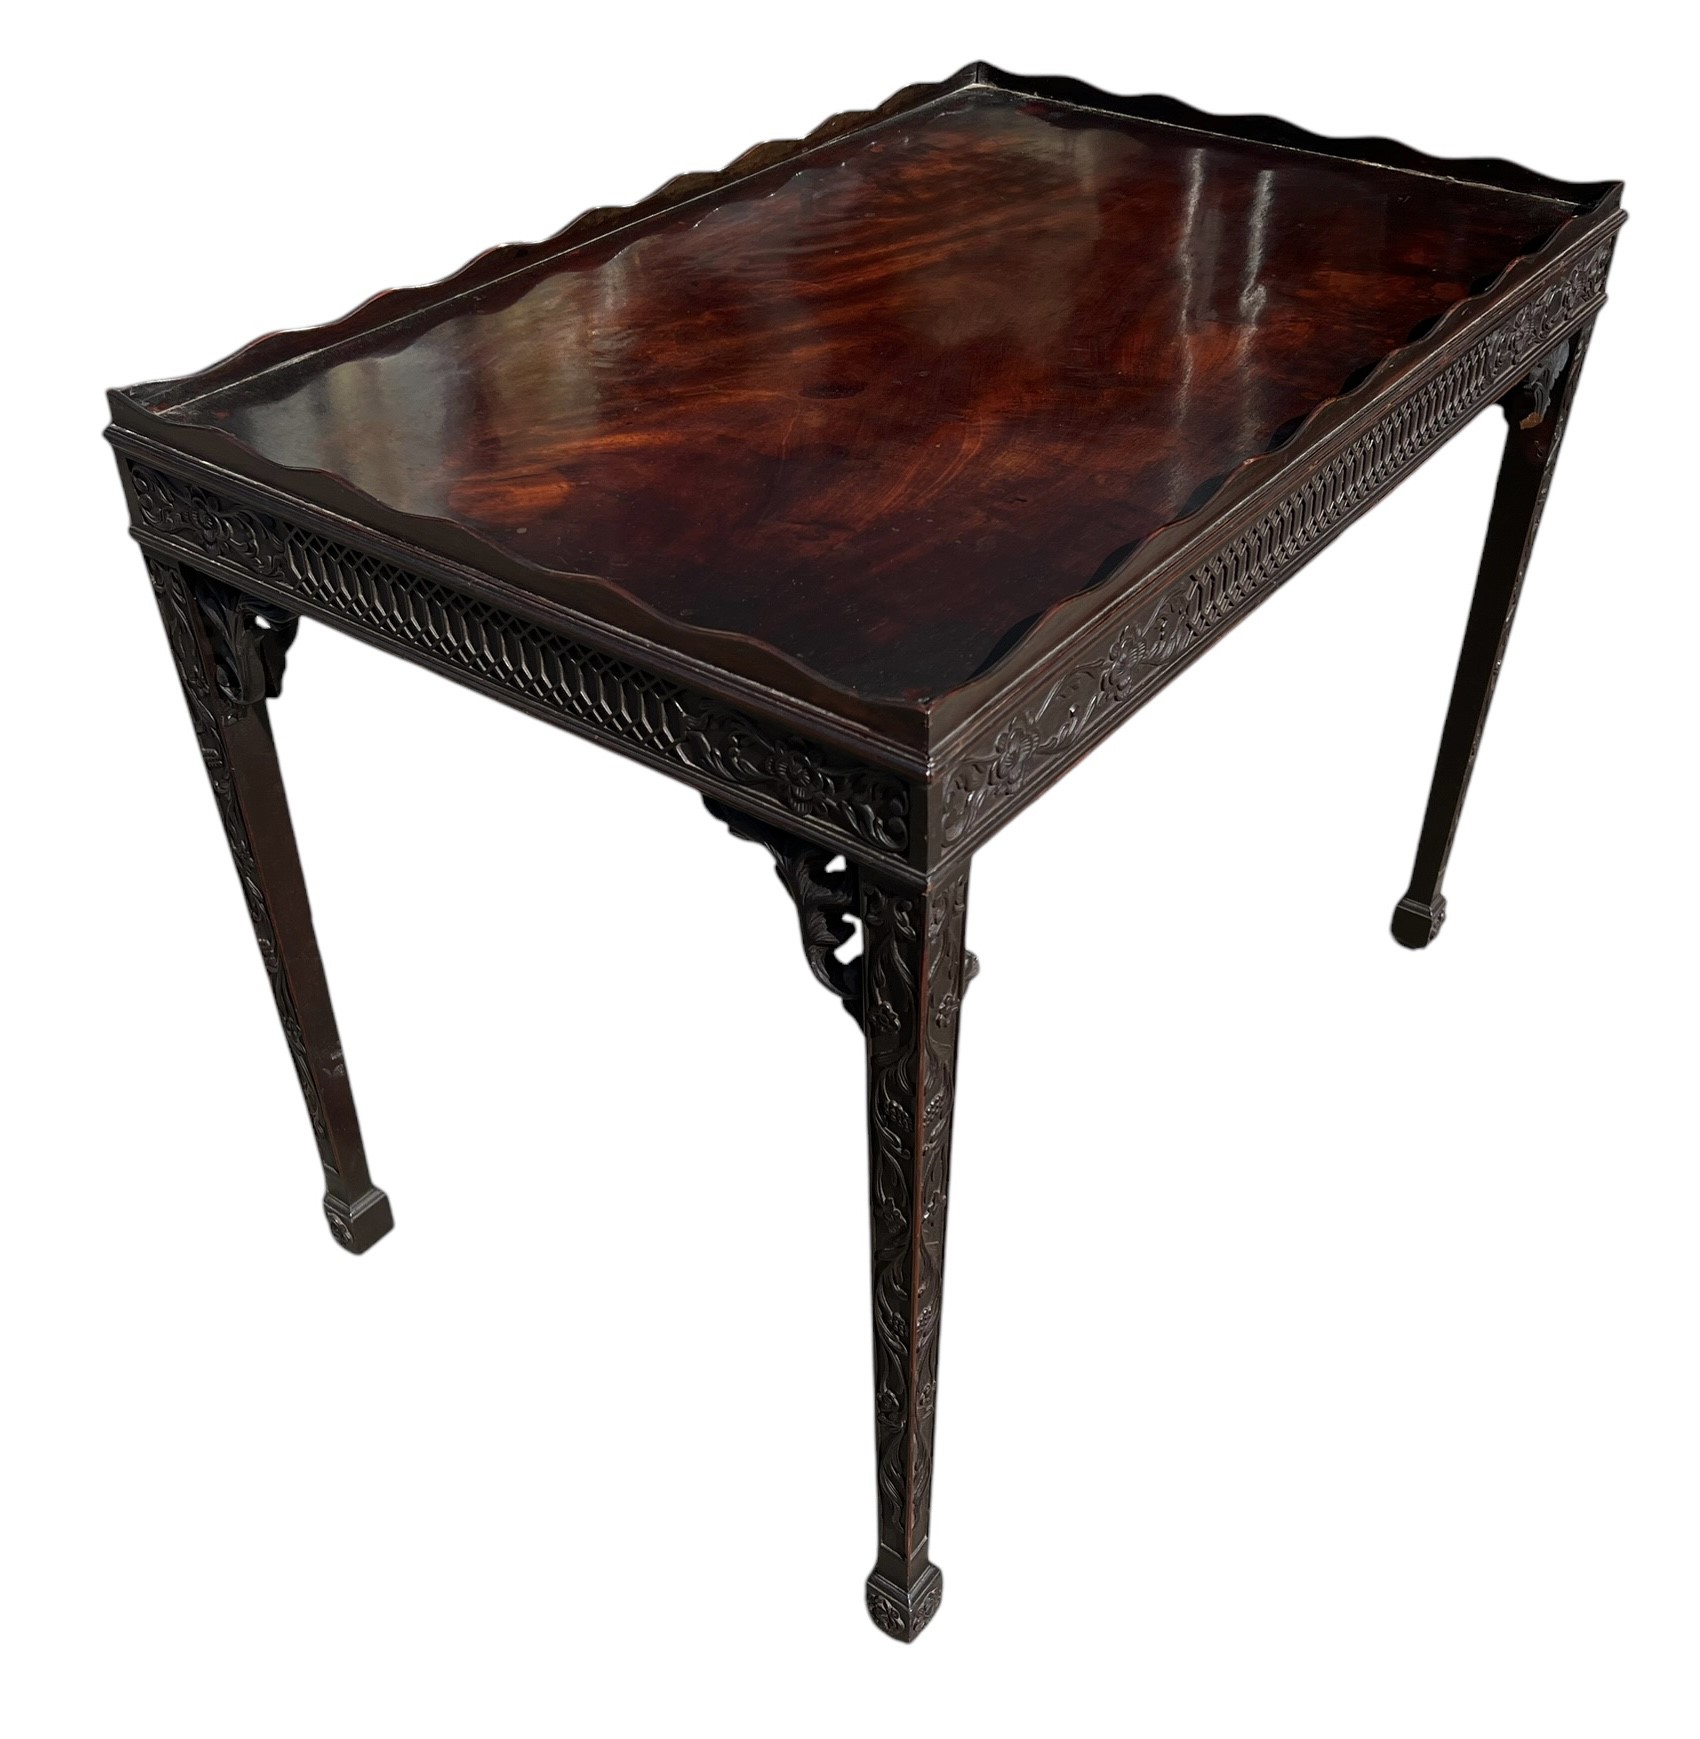 A RARE 18TH CENTURY AMERICA COLONIAL WILLIAMSBURG VIRGINIA CARVED MAHOGANY CHINA SILVER TABLE The - Image 6 of 7